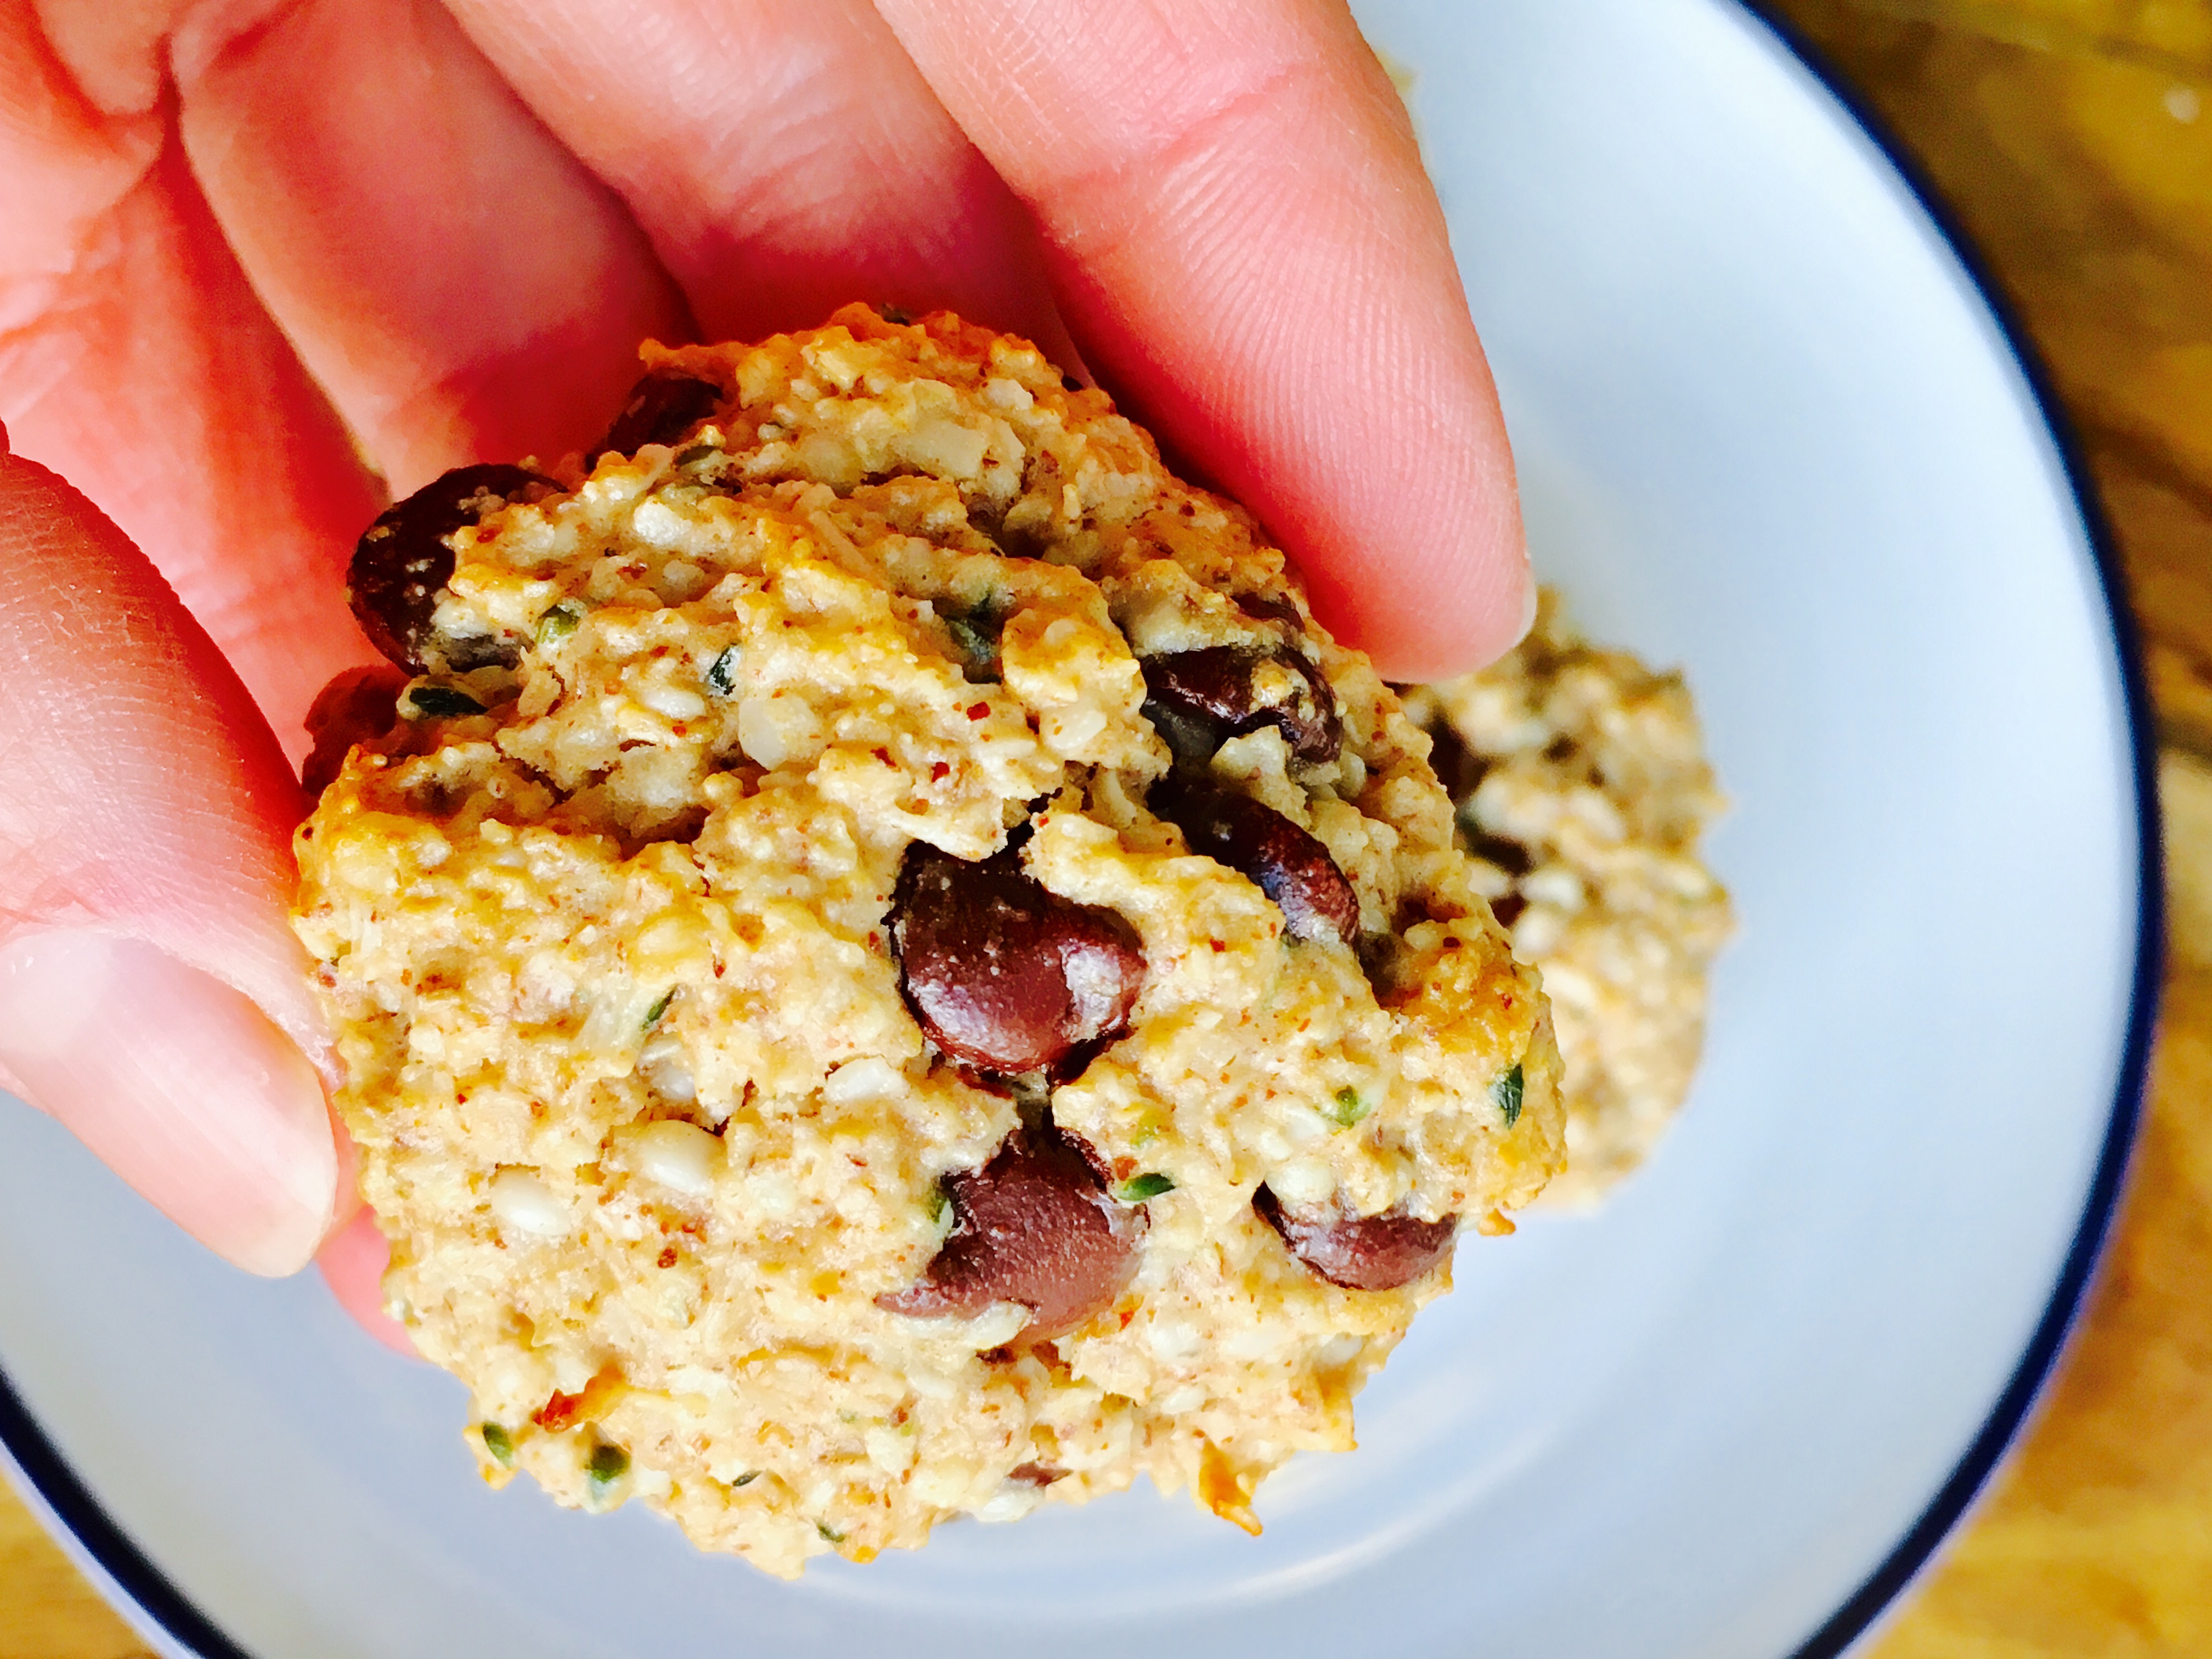 These Oatmeal Hemp Seed Cookie Bites are a delicious marriage of chocolate chip oatmeal cookies and coconut macaroons. Best of all, they’re packed with nutrient-rich ingredients like oats, dark chocolate, and hemp seed.